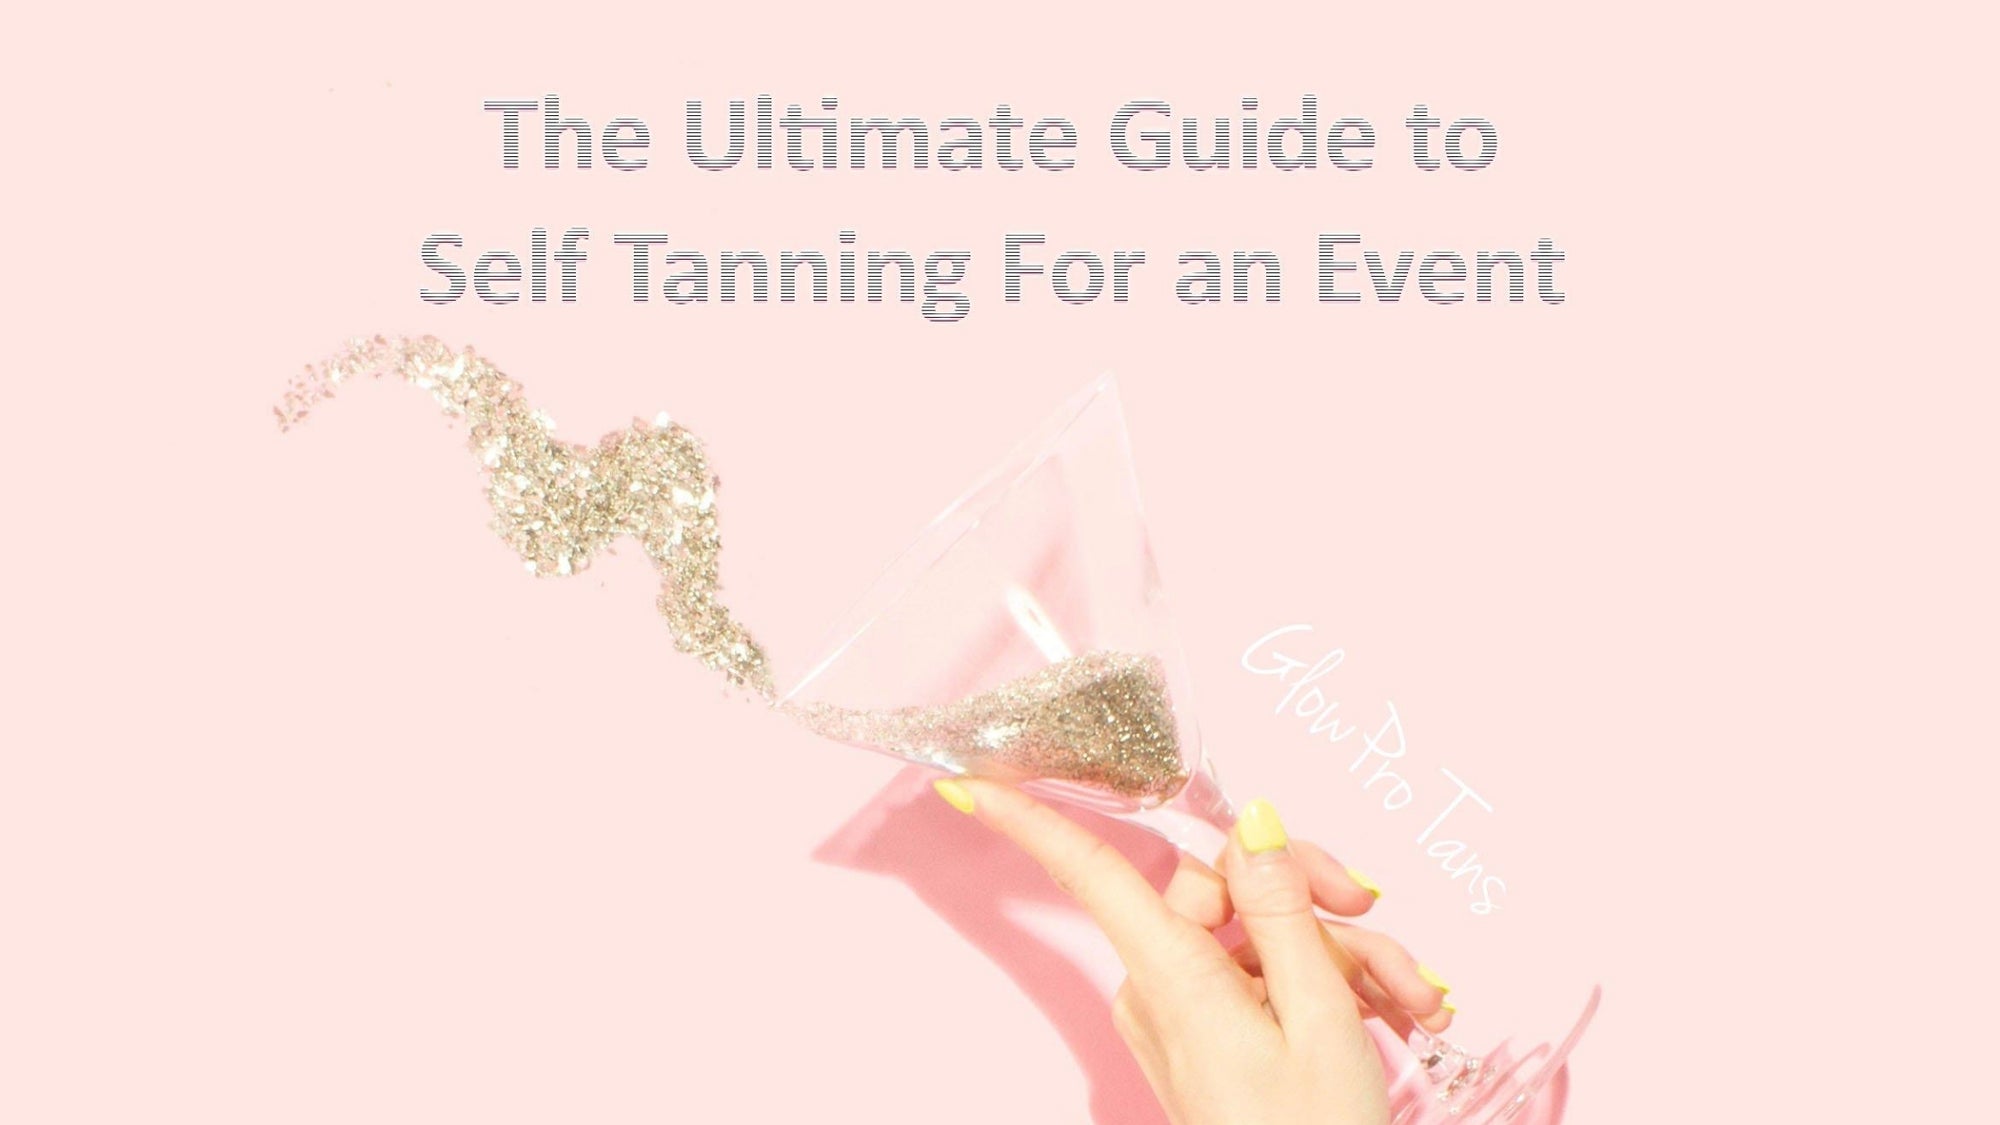 The Ultimate Guide to Self Tanning For an Event